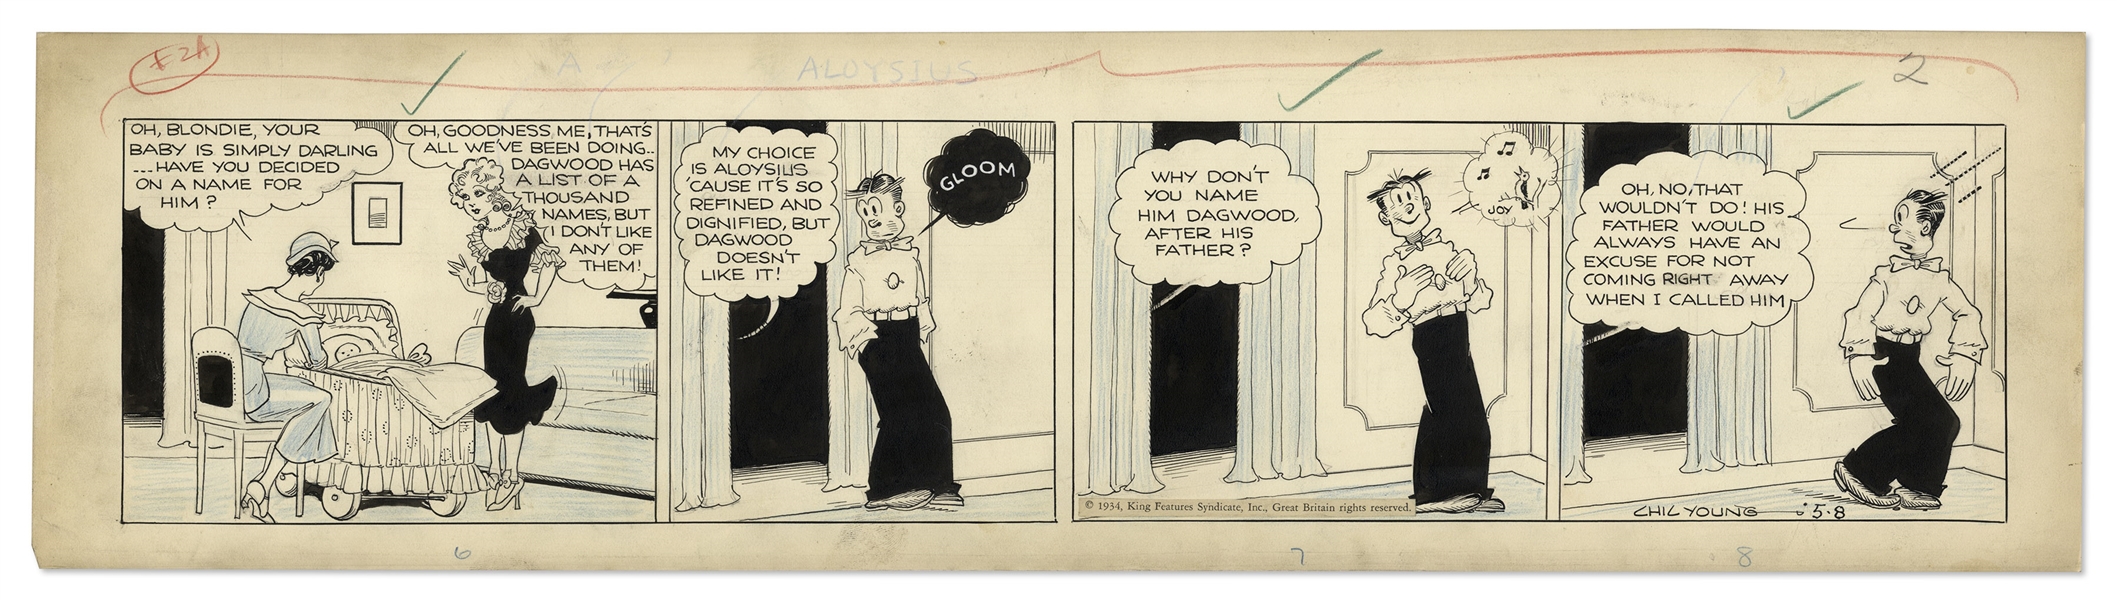 Chic Young Hand-Drawn ''Blondie'' Comic Strip From 1934 -- Blondie Muses on Names for Their New Baby